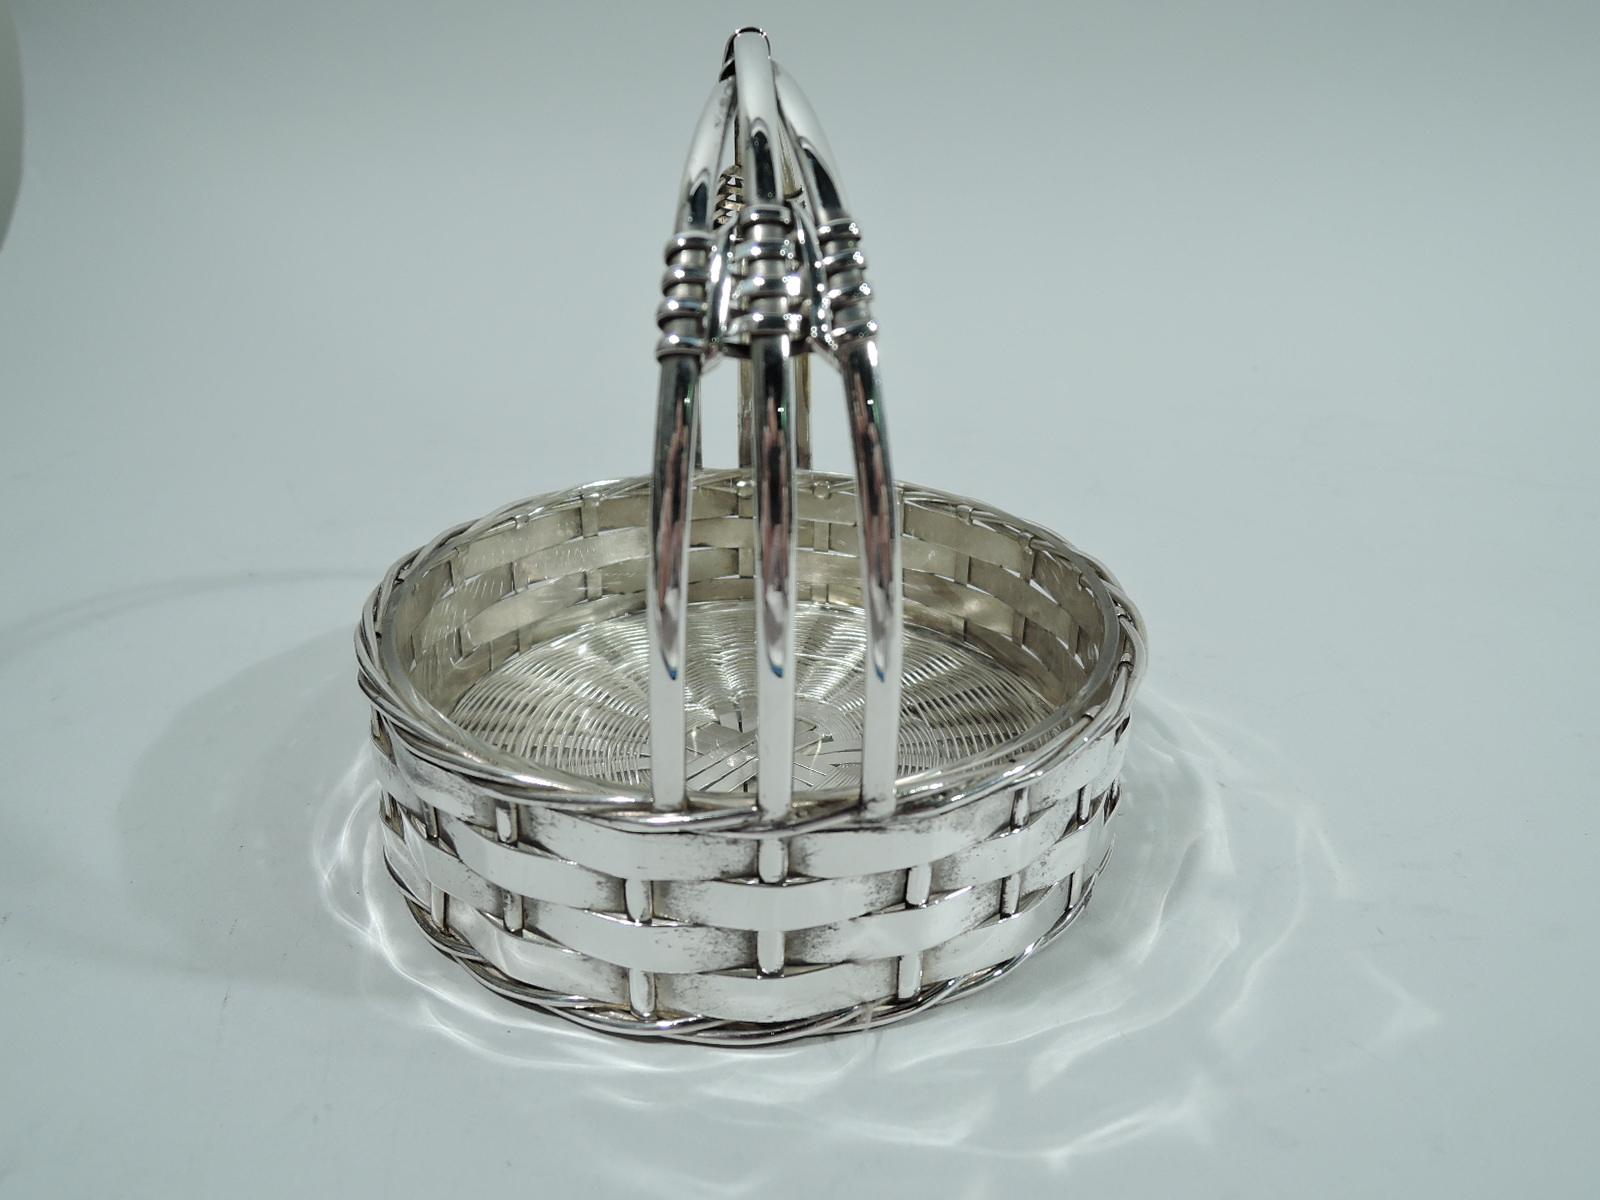 German 800 silver basket. Made by Friedrich Wilhelm Quist in Esslingen, ca 1910. Round with straight and woven sides, and twisted rim and base. C-scroll stationary handle comprising 3 wire-wrapped strands. Detachable clear glass liner. Marks include